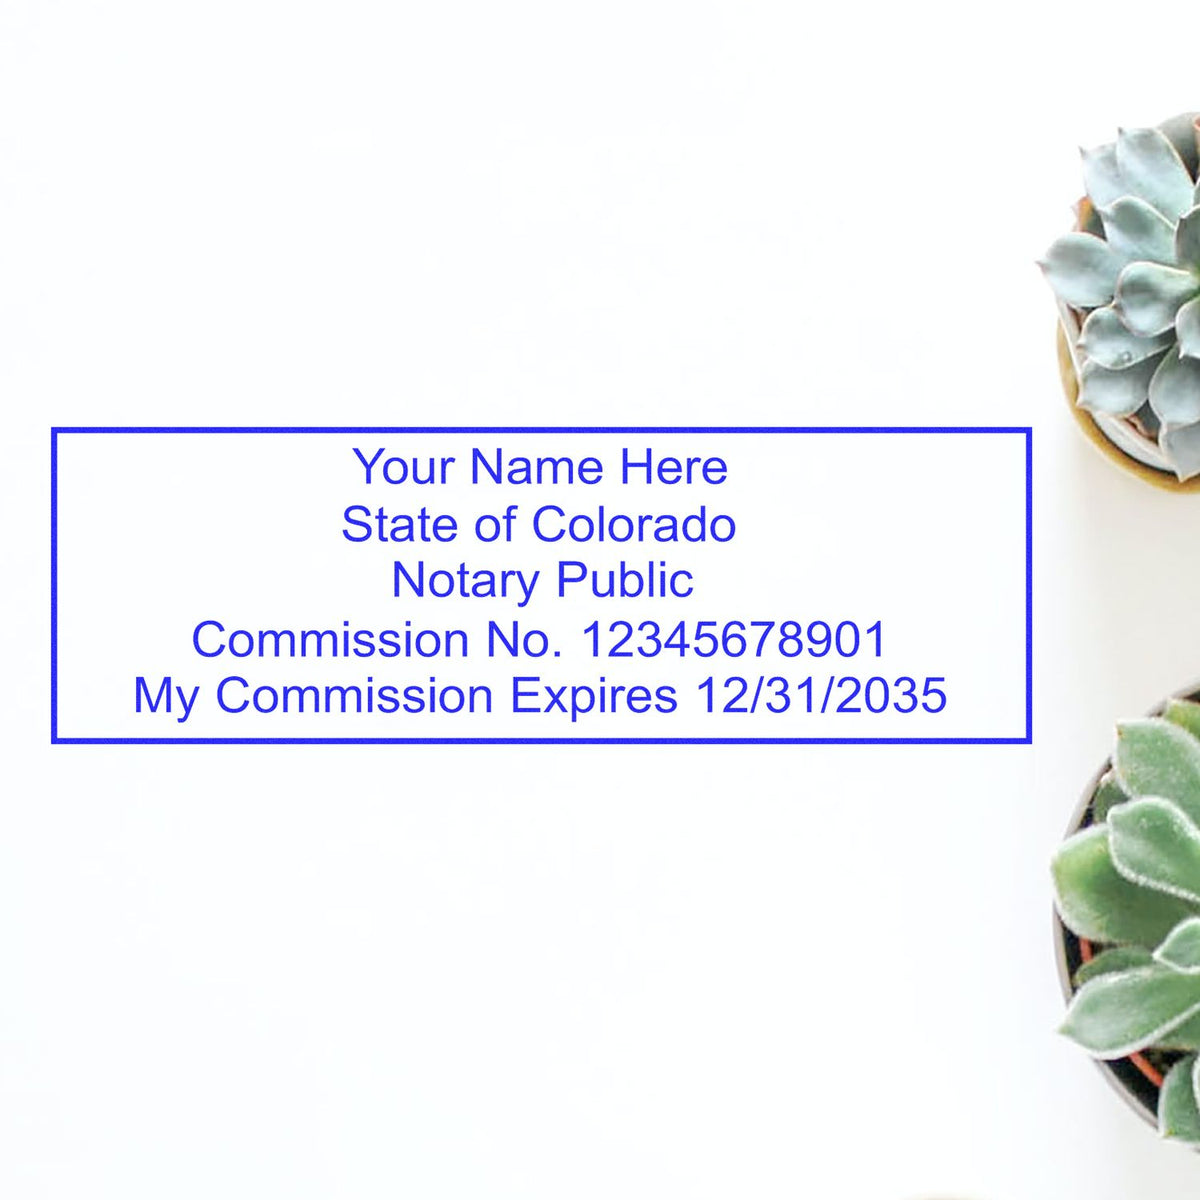 An alternative view of the Super Slim Colorado Notary Public Stamp stamped on a sheet of paper showing the image in use